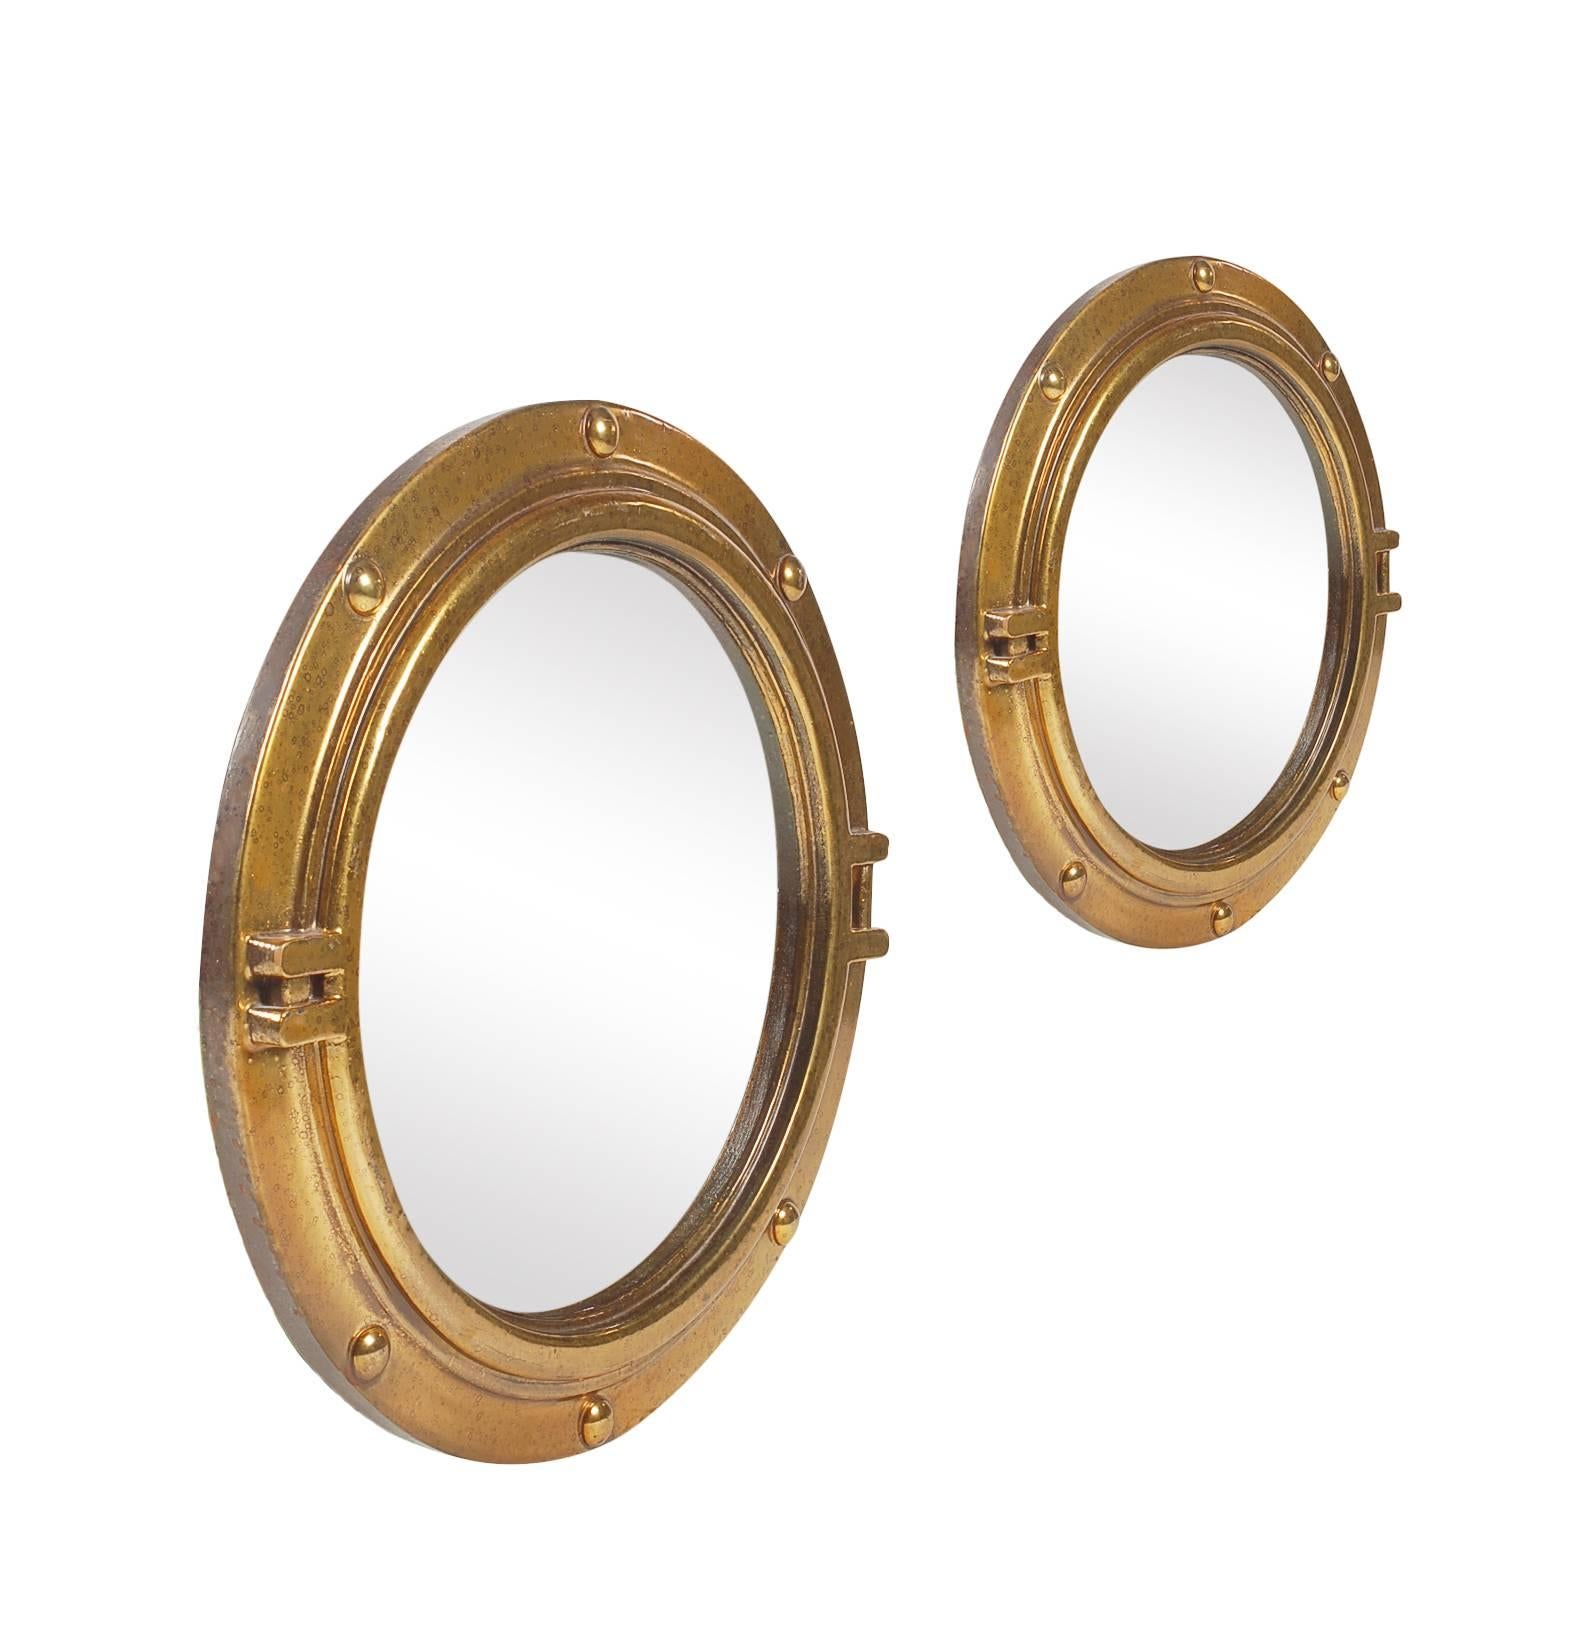 A nice matching pair of gold lacquered porthole style mirrors. Both are in excellent condition and ready for use.